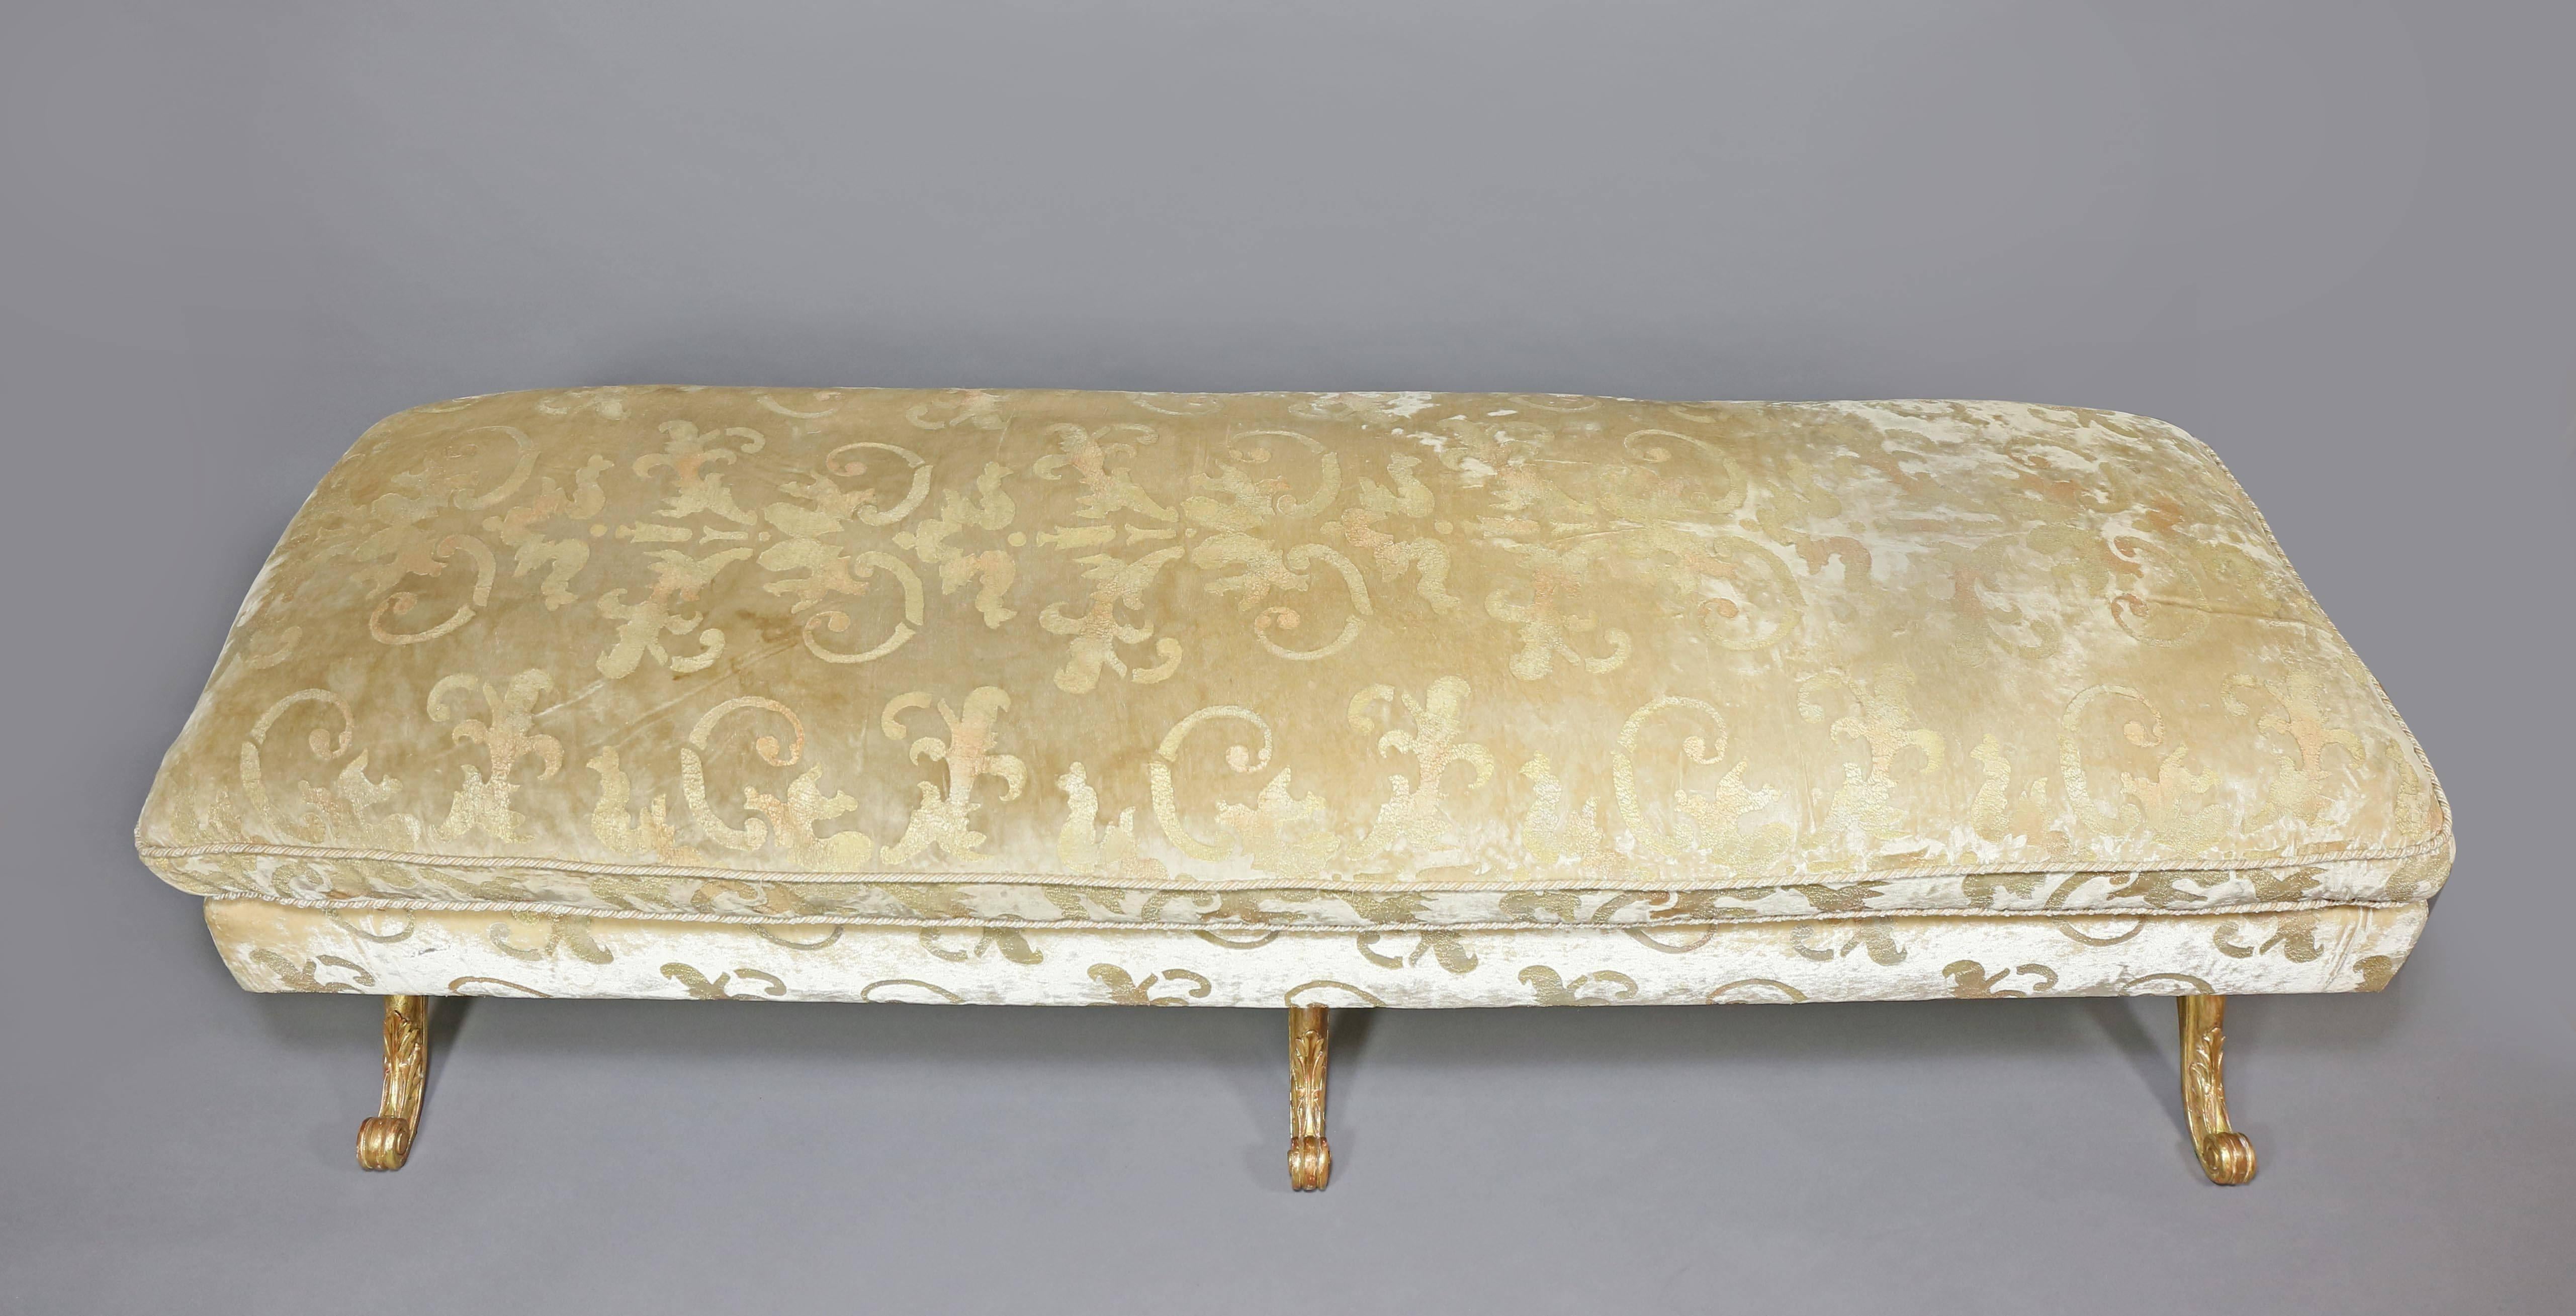 Rectangular with cushioned seat raised on carved X-form legs with central carved rosette joined by a turned stretcher, with scroll feet. The gilding is in excellent condition. The fabric on the base section of one is in poor condition on the